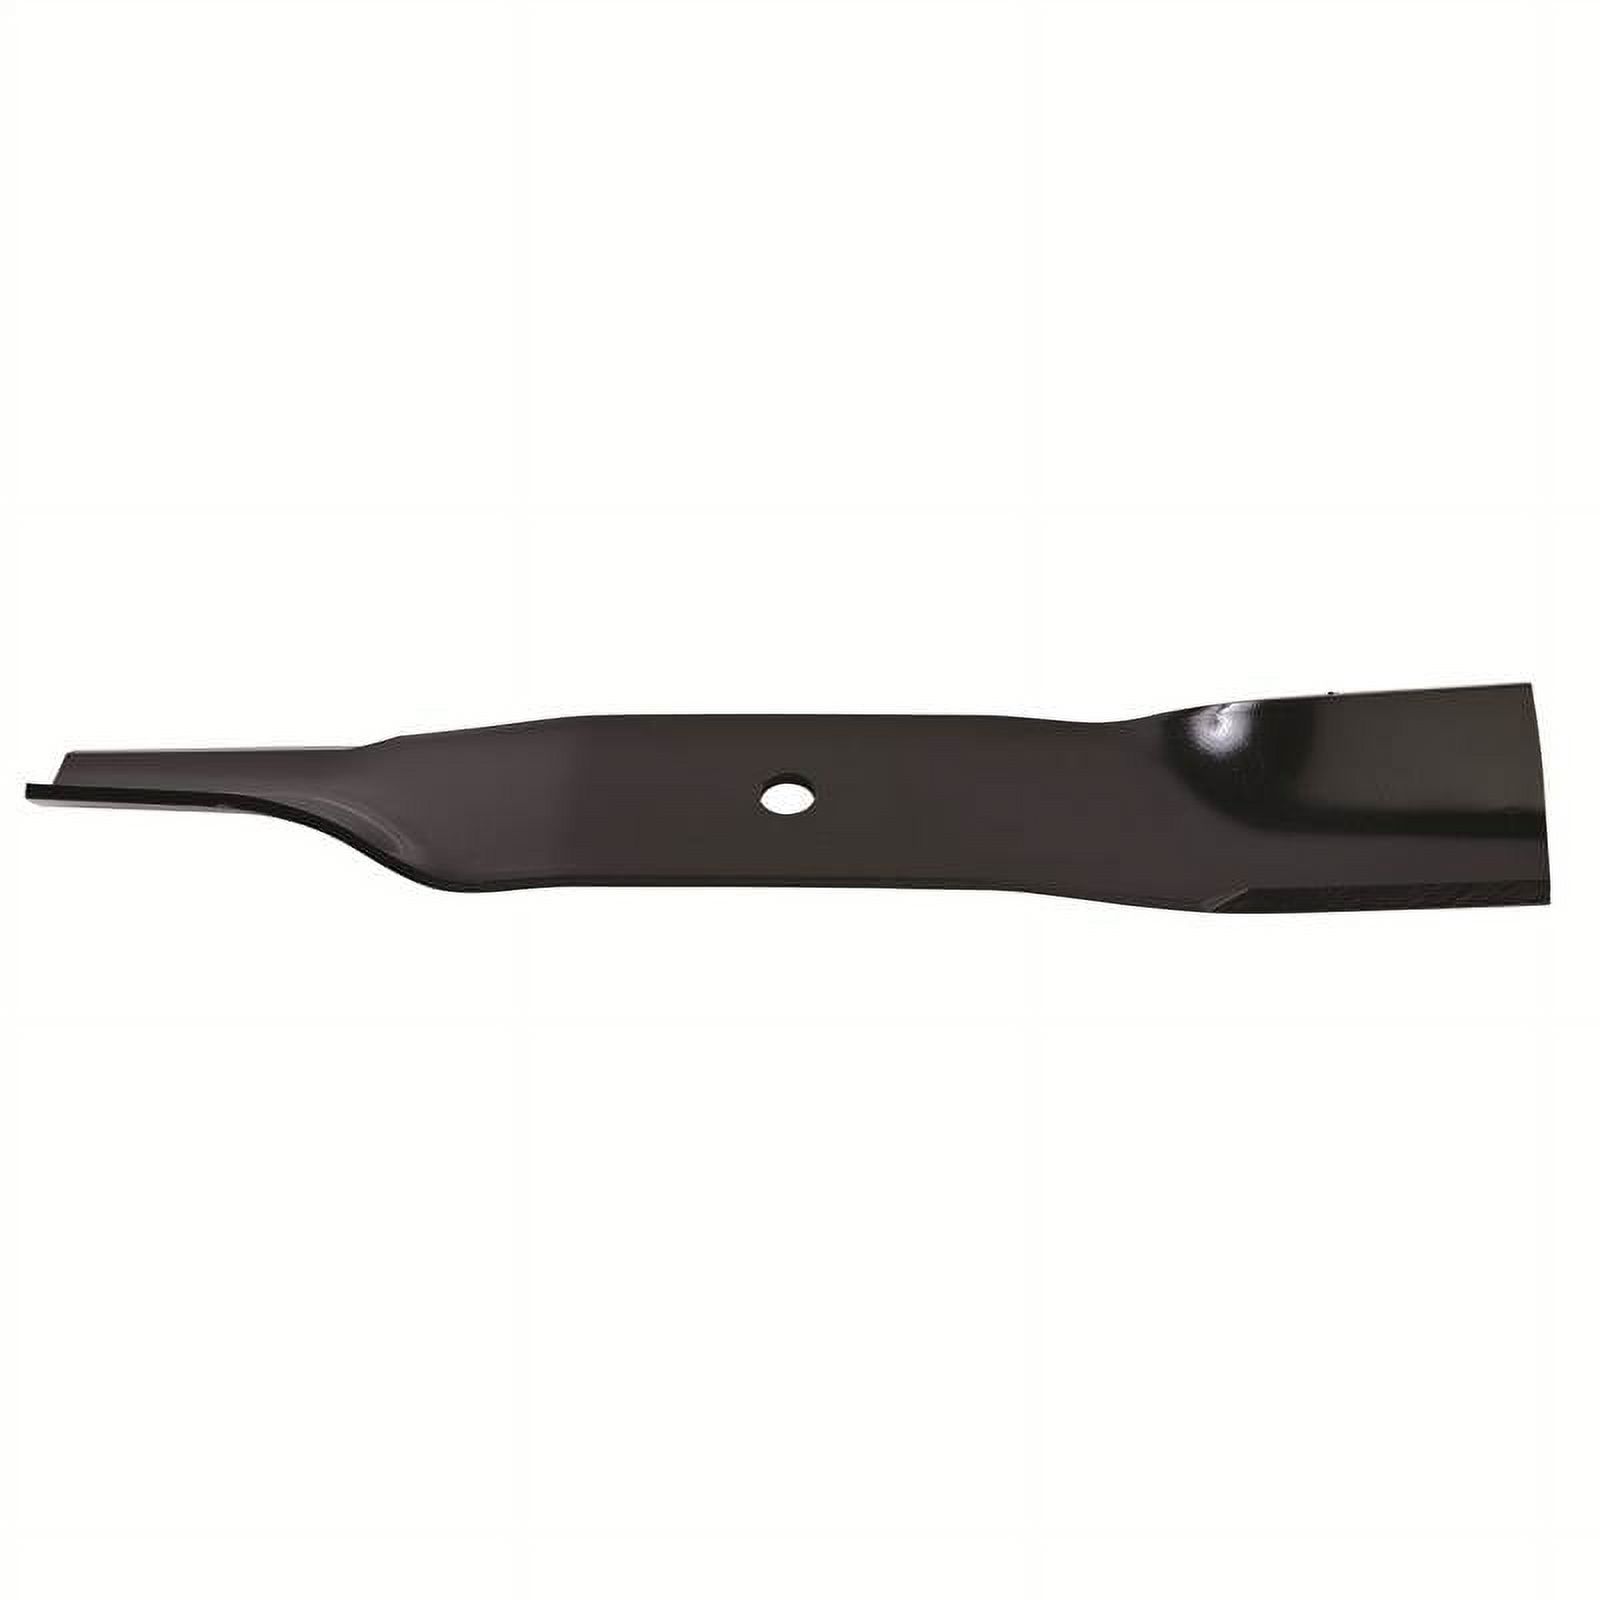 Mower Blade, 19-1/2" Compatible with John Deere M83459 - image 1 of 2